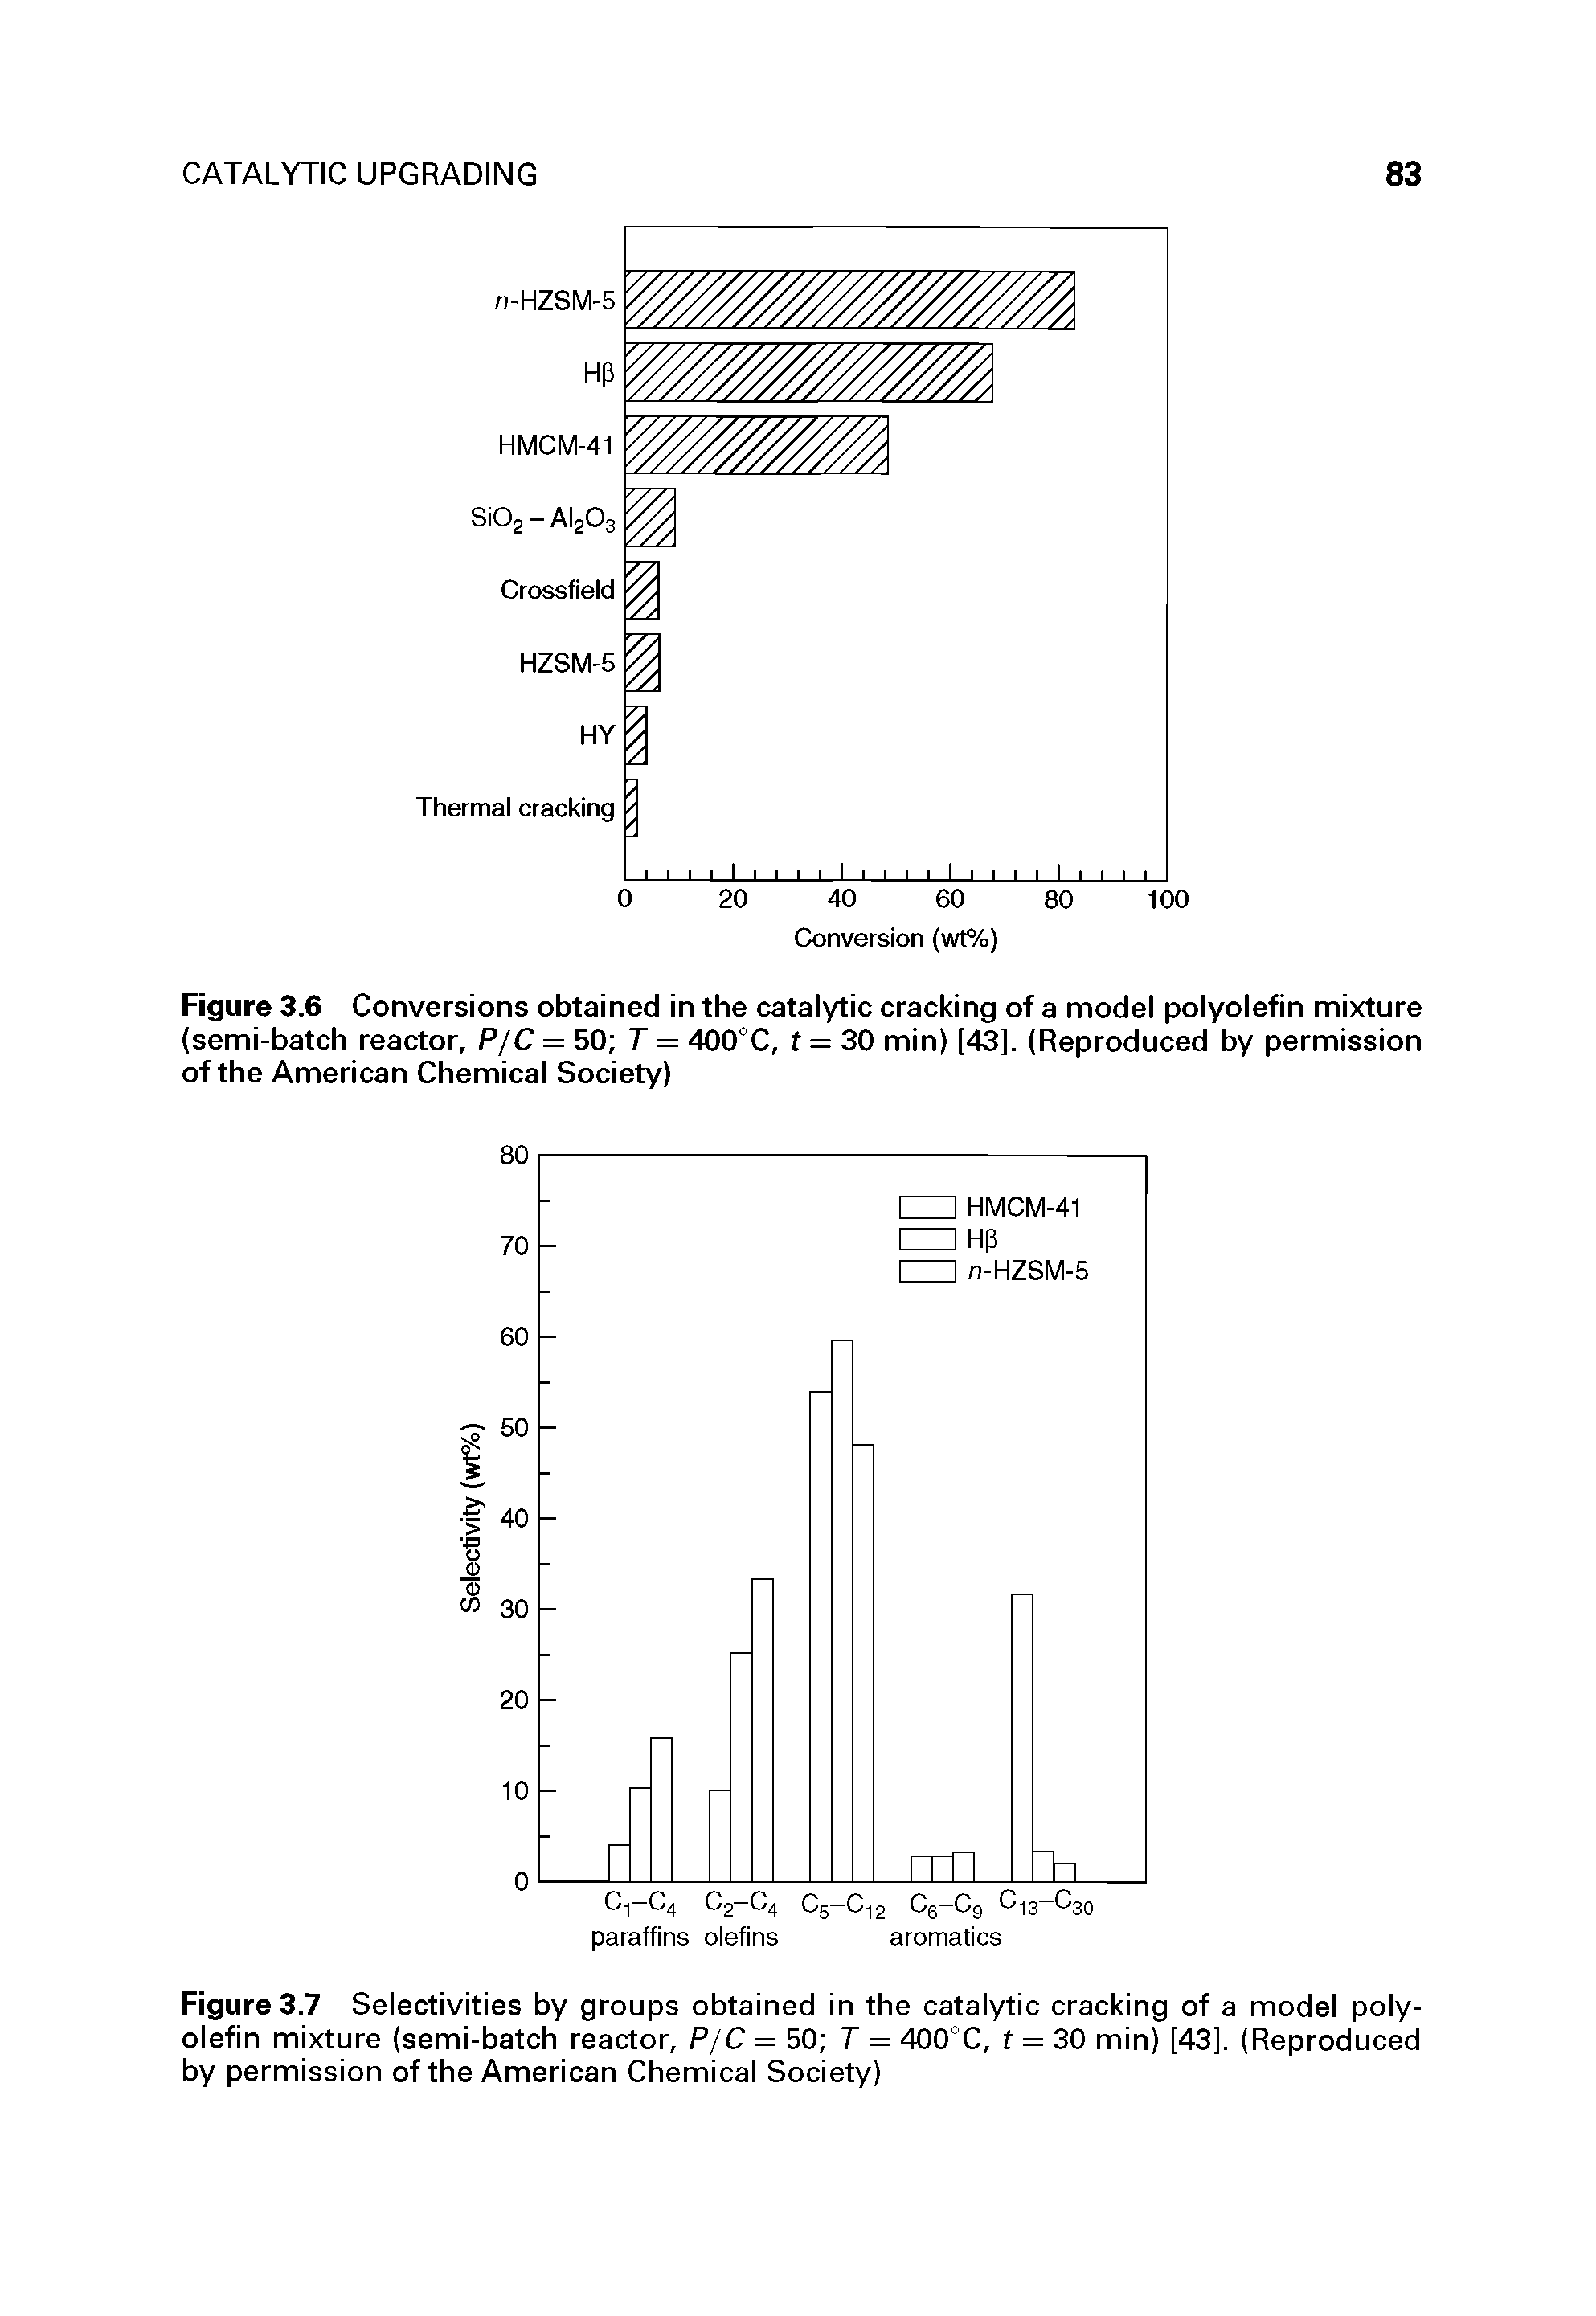 Figure 3.6 Conversions obtained in the catalytic cracking of a model polyolefin mixture (semi-batch reactor, P/C = 50 T = 400°C, t = 30 min) [43]. (Reproduced by permission of the American Chemical Society)...